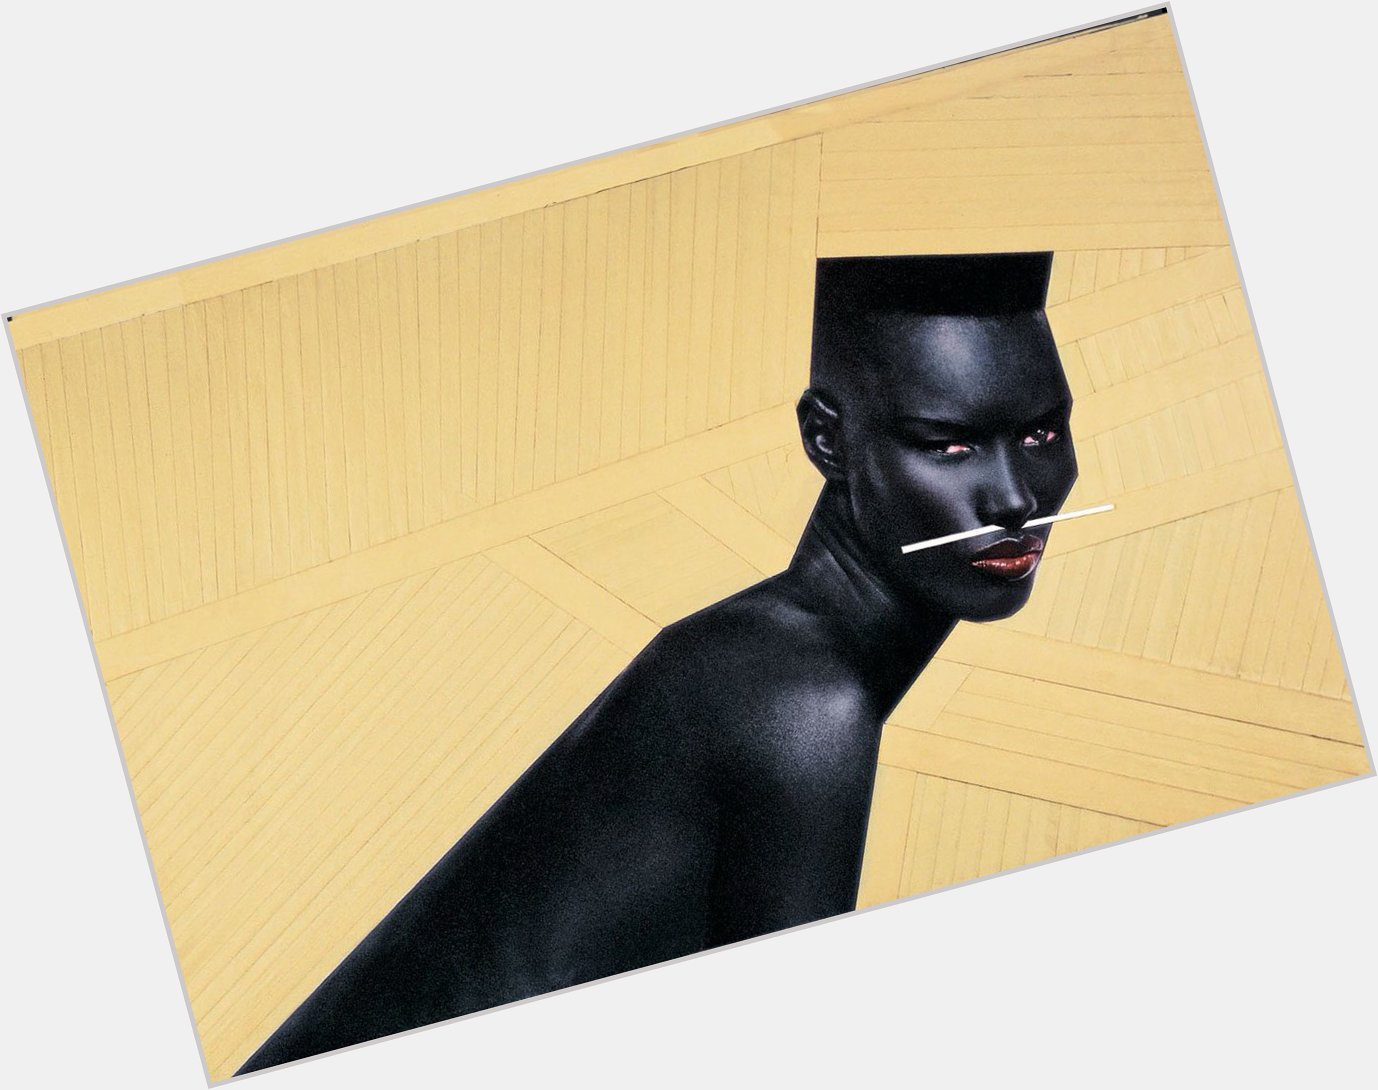 Ageing with grace | grace jones is 70 today | happy bday to an incommensurable icon | photo: j.p. goude 